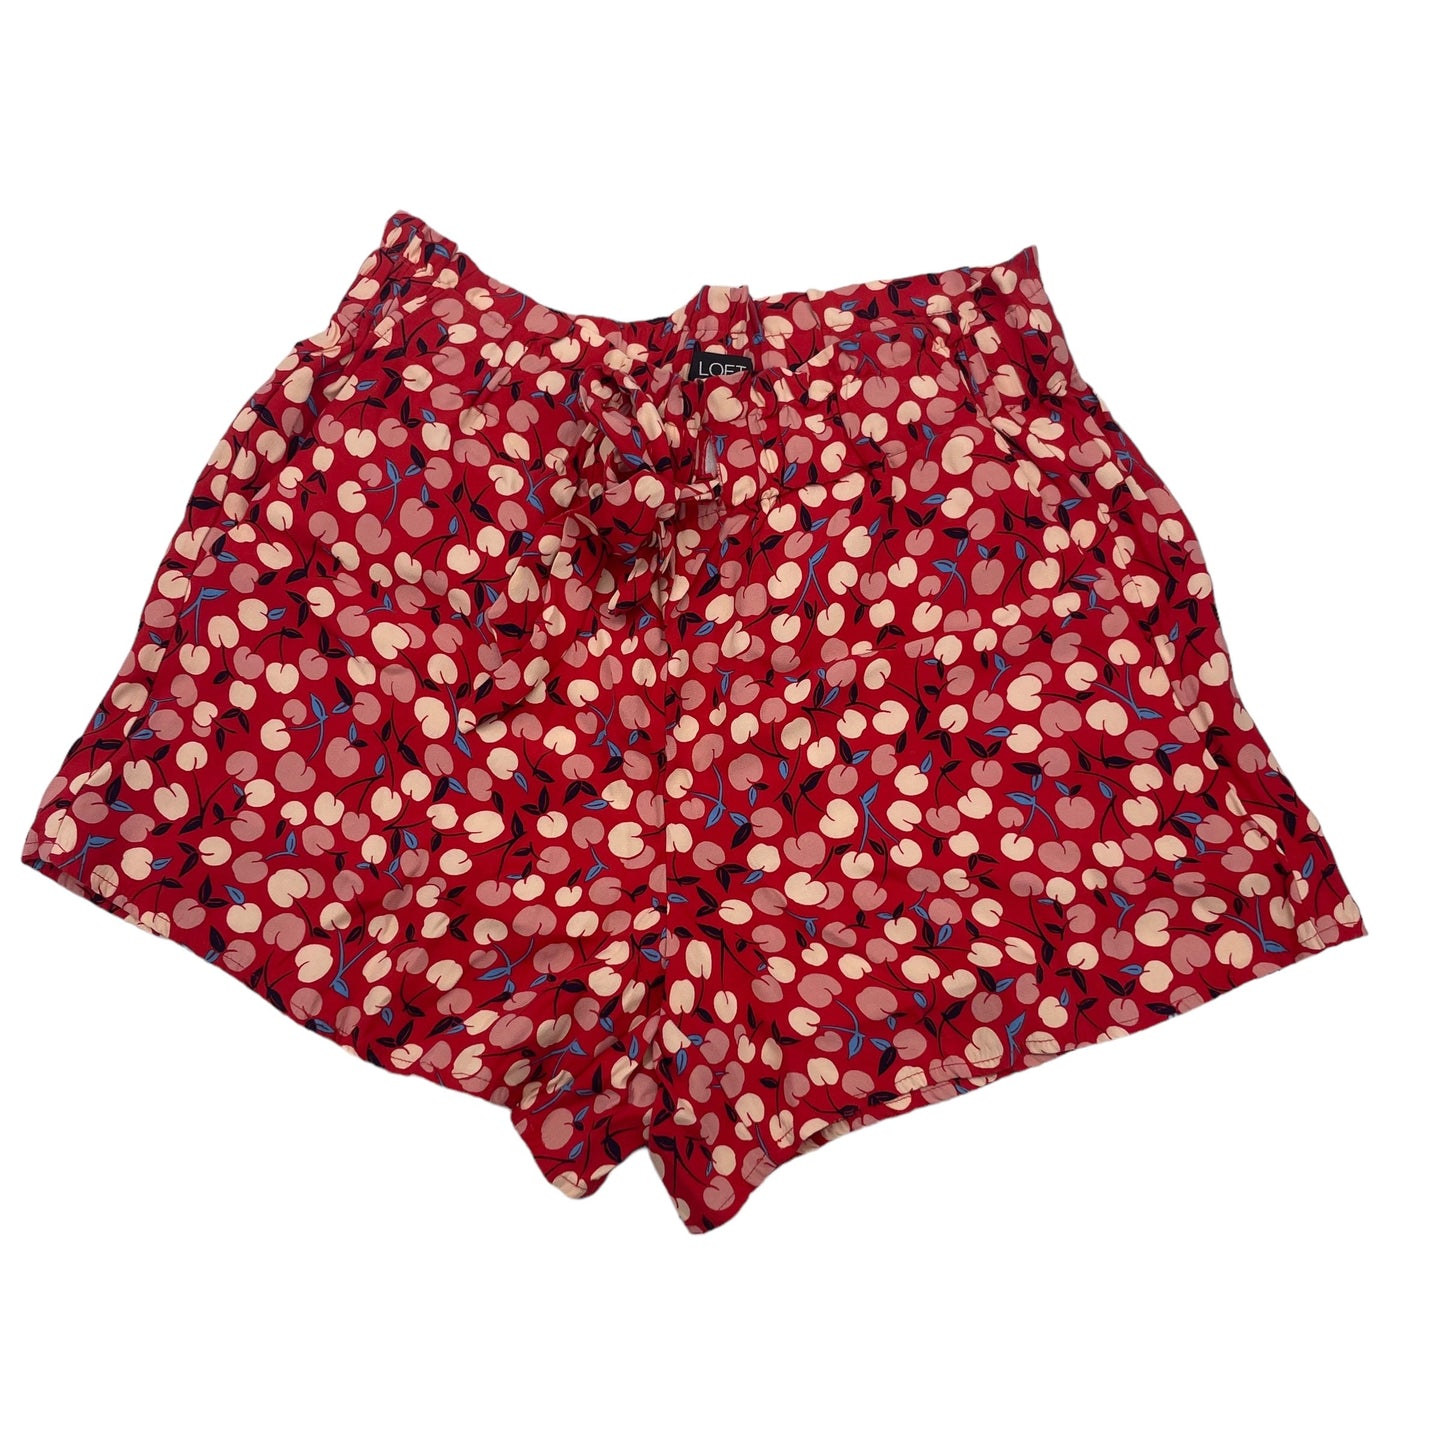 RED SHORTS by LOFT Size:S